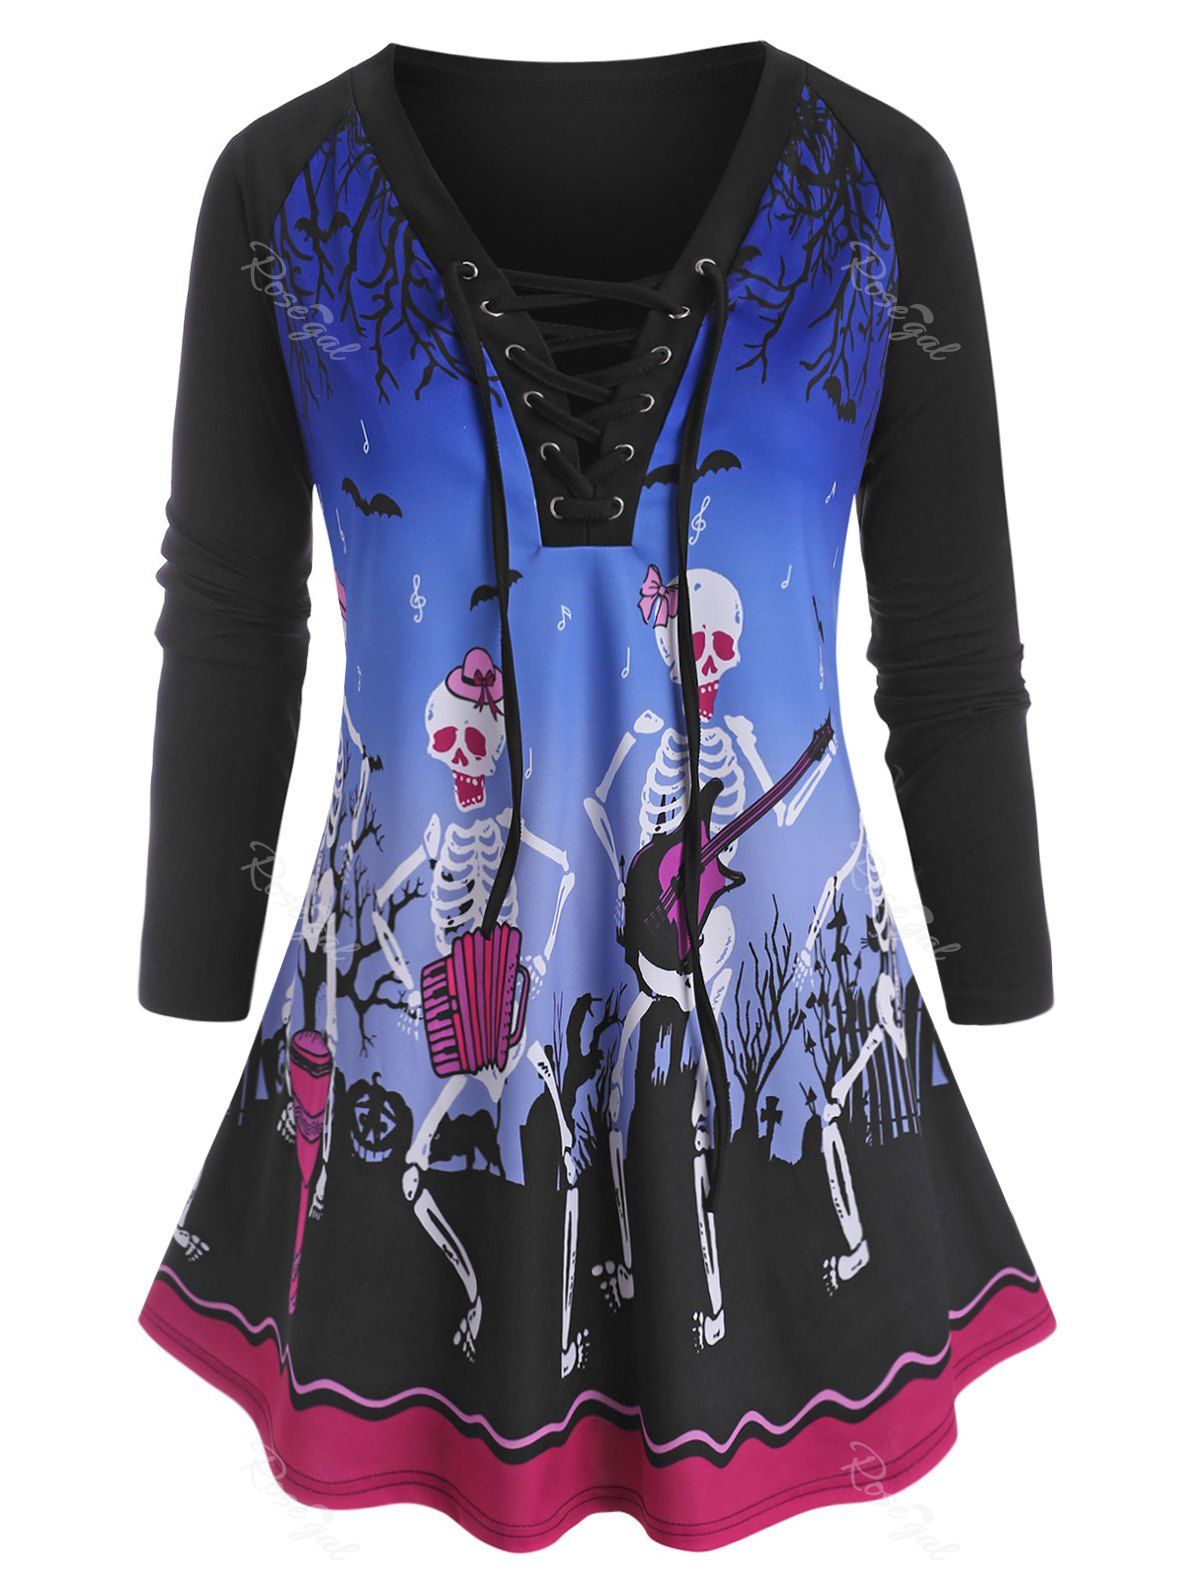 Outfit Plus Size Skeleton Bat Print Lace-up Halloween Tunic Top  